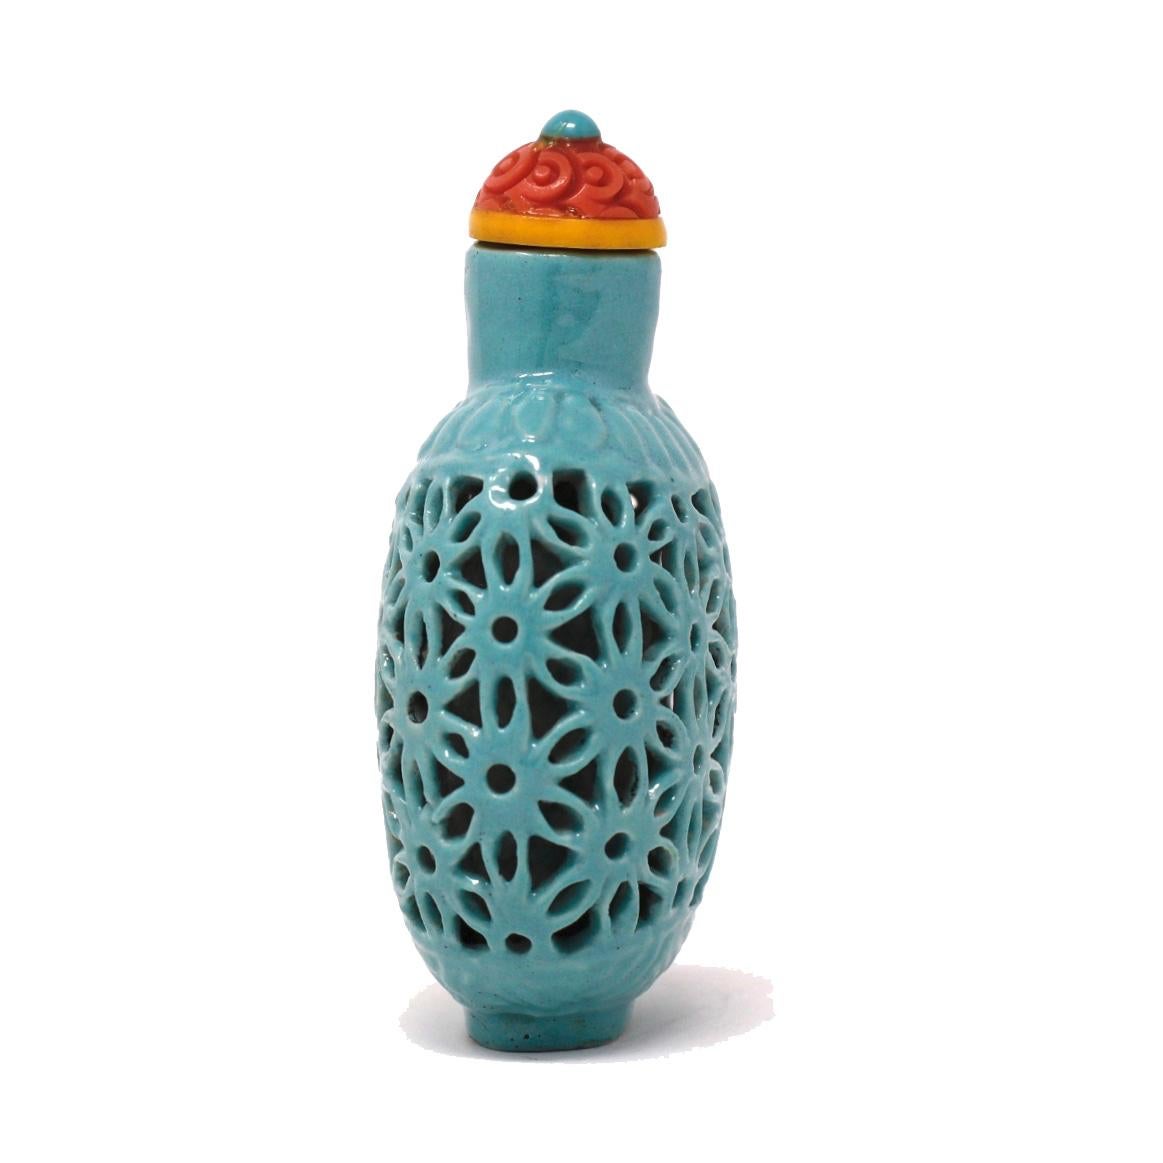 Ceramic Turquoise Blue Chinese Reticulated Soft Paste Porcelain Snuff Bottle, circa 1900